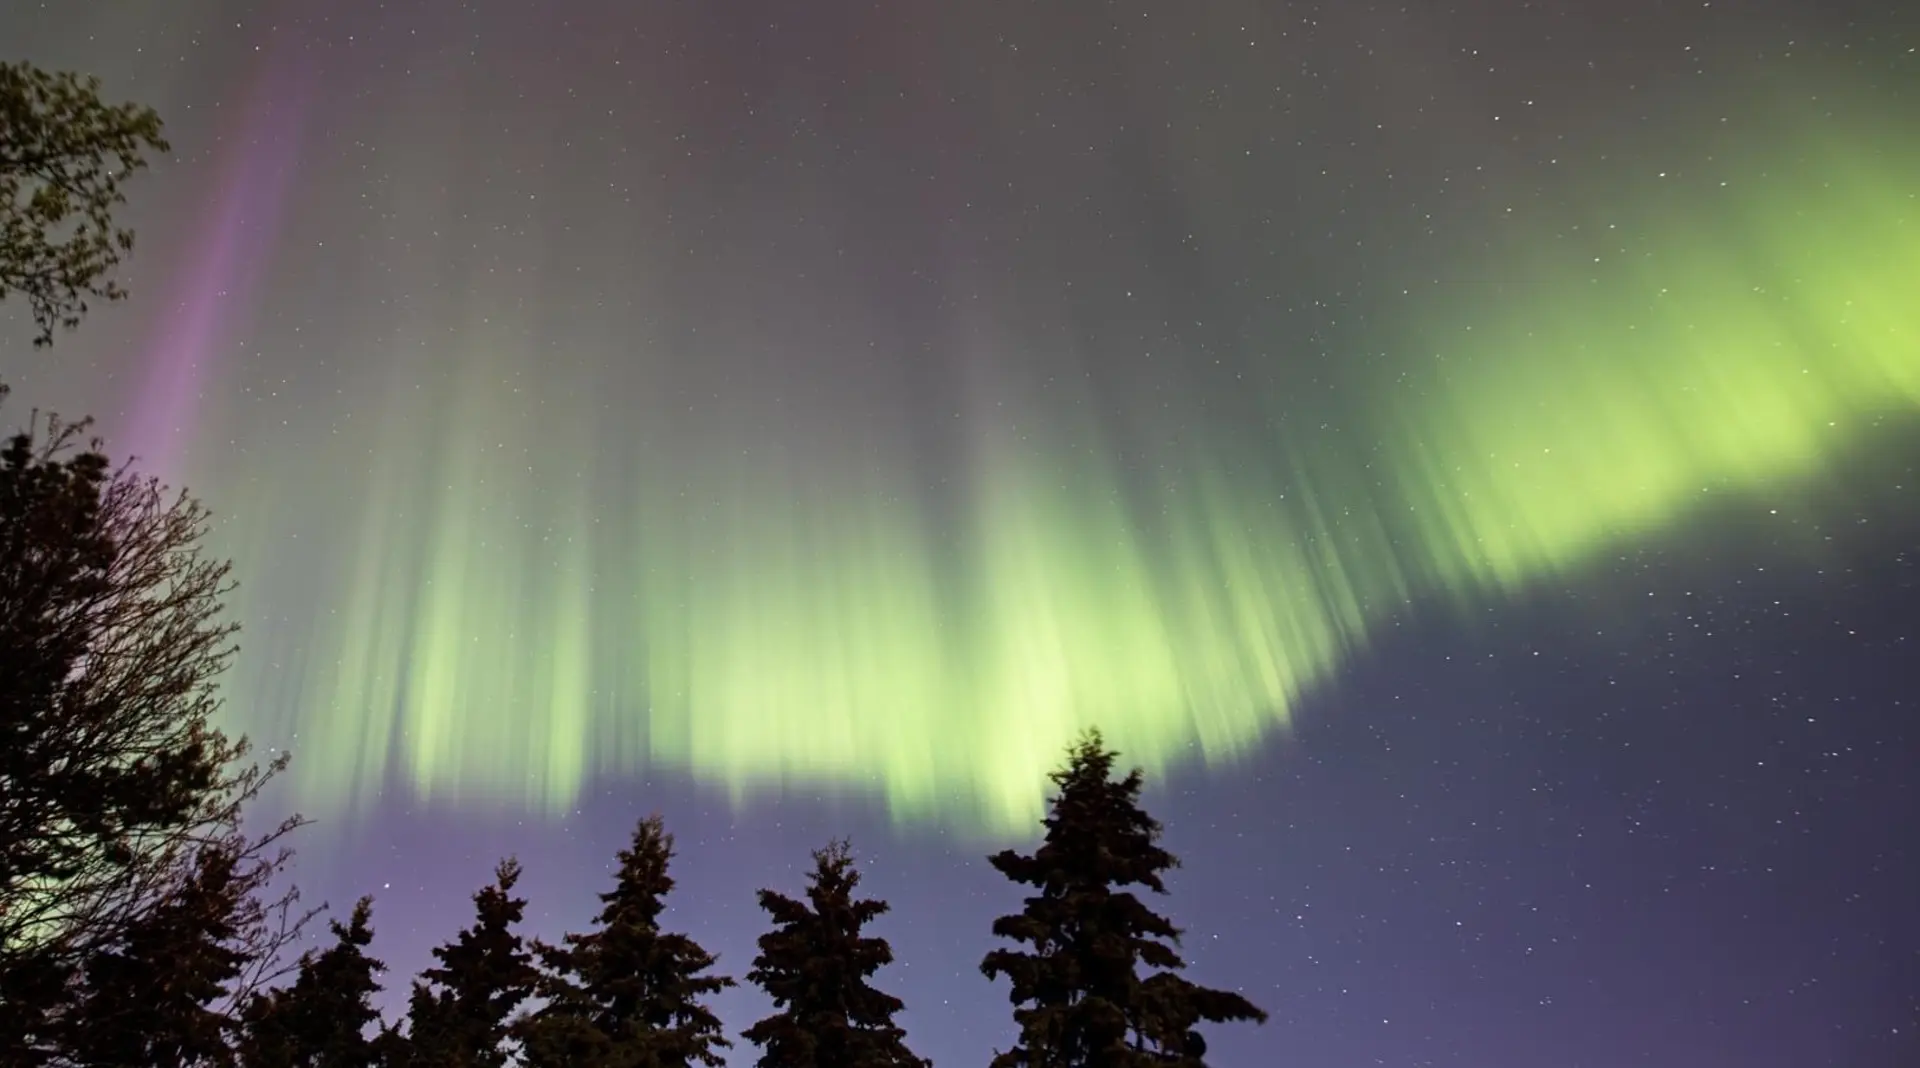 Grab your camera: Sunday night auroras are possible over Canada